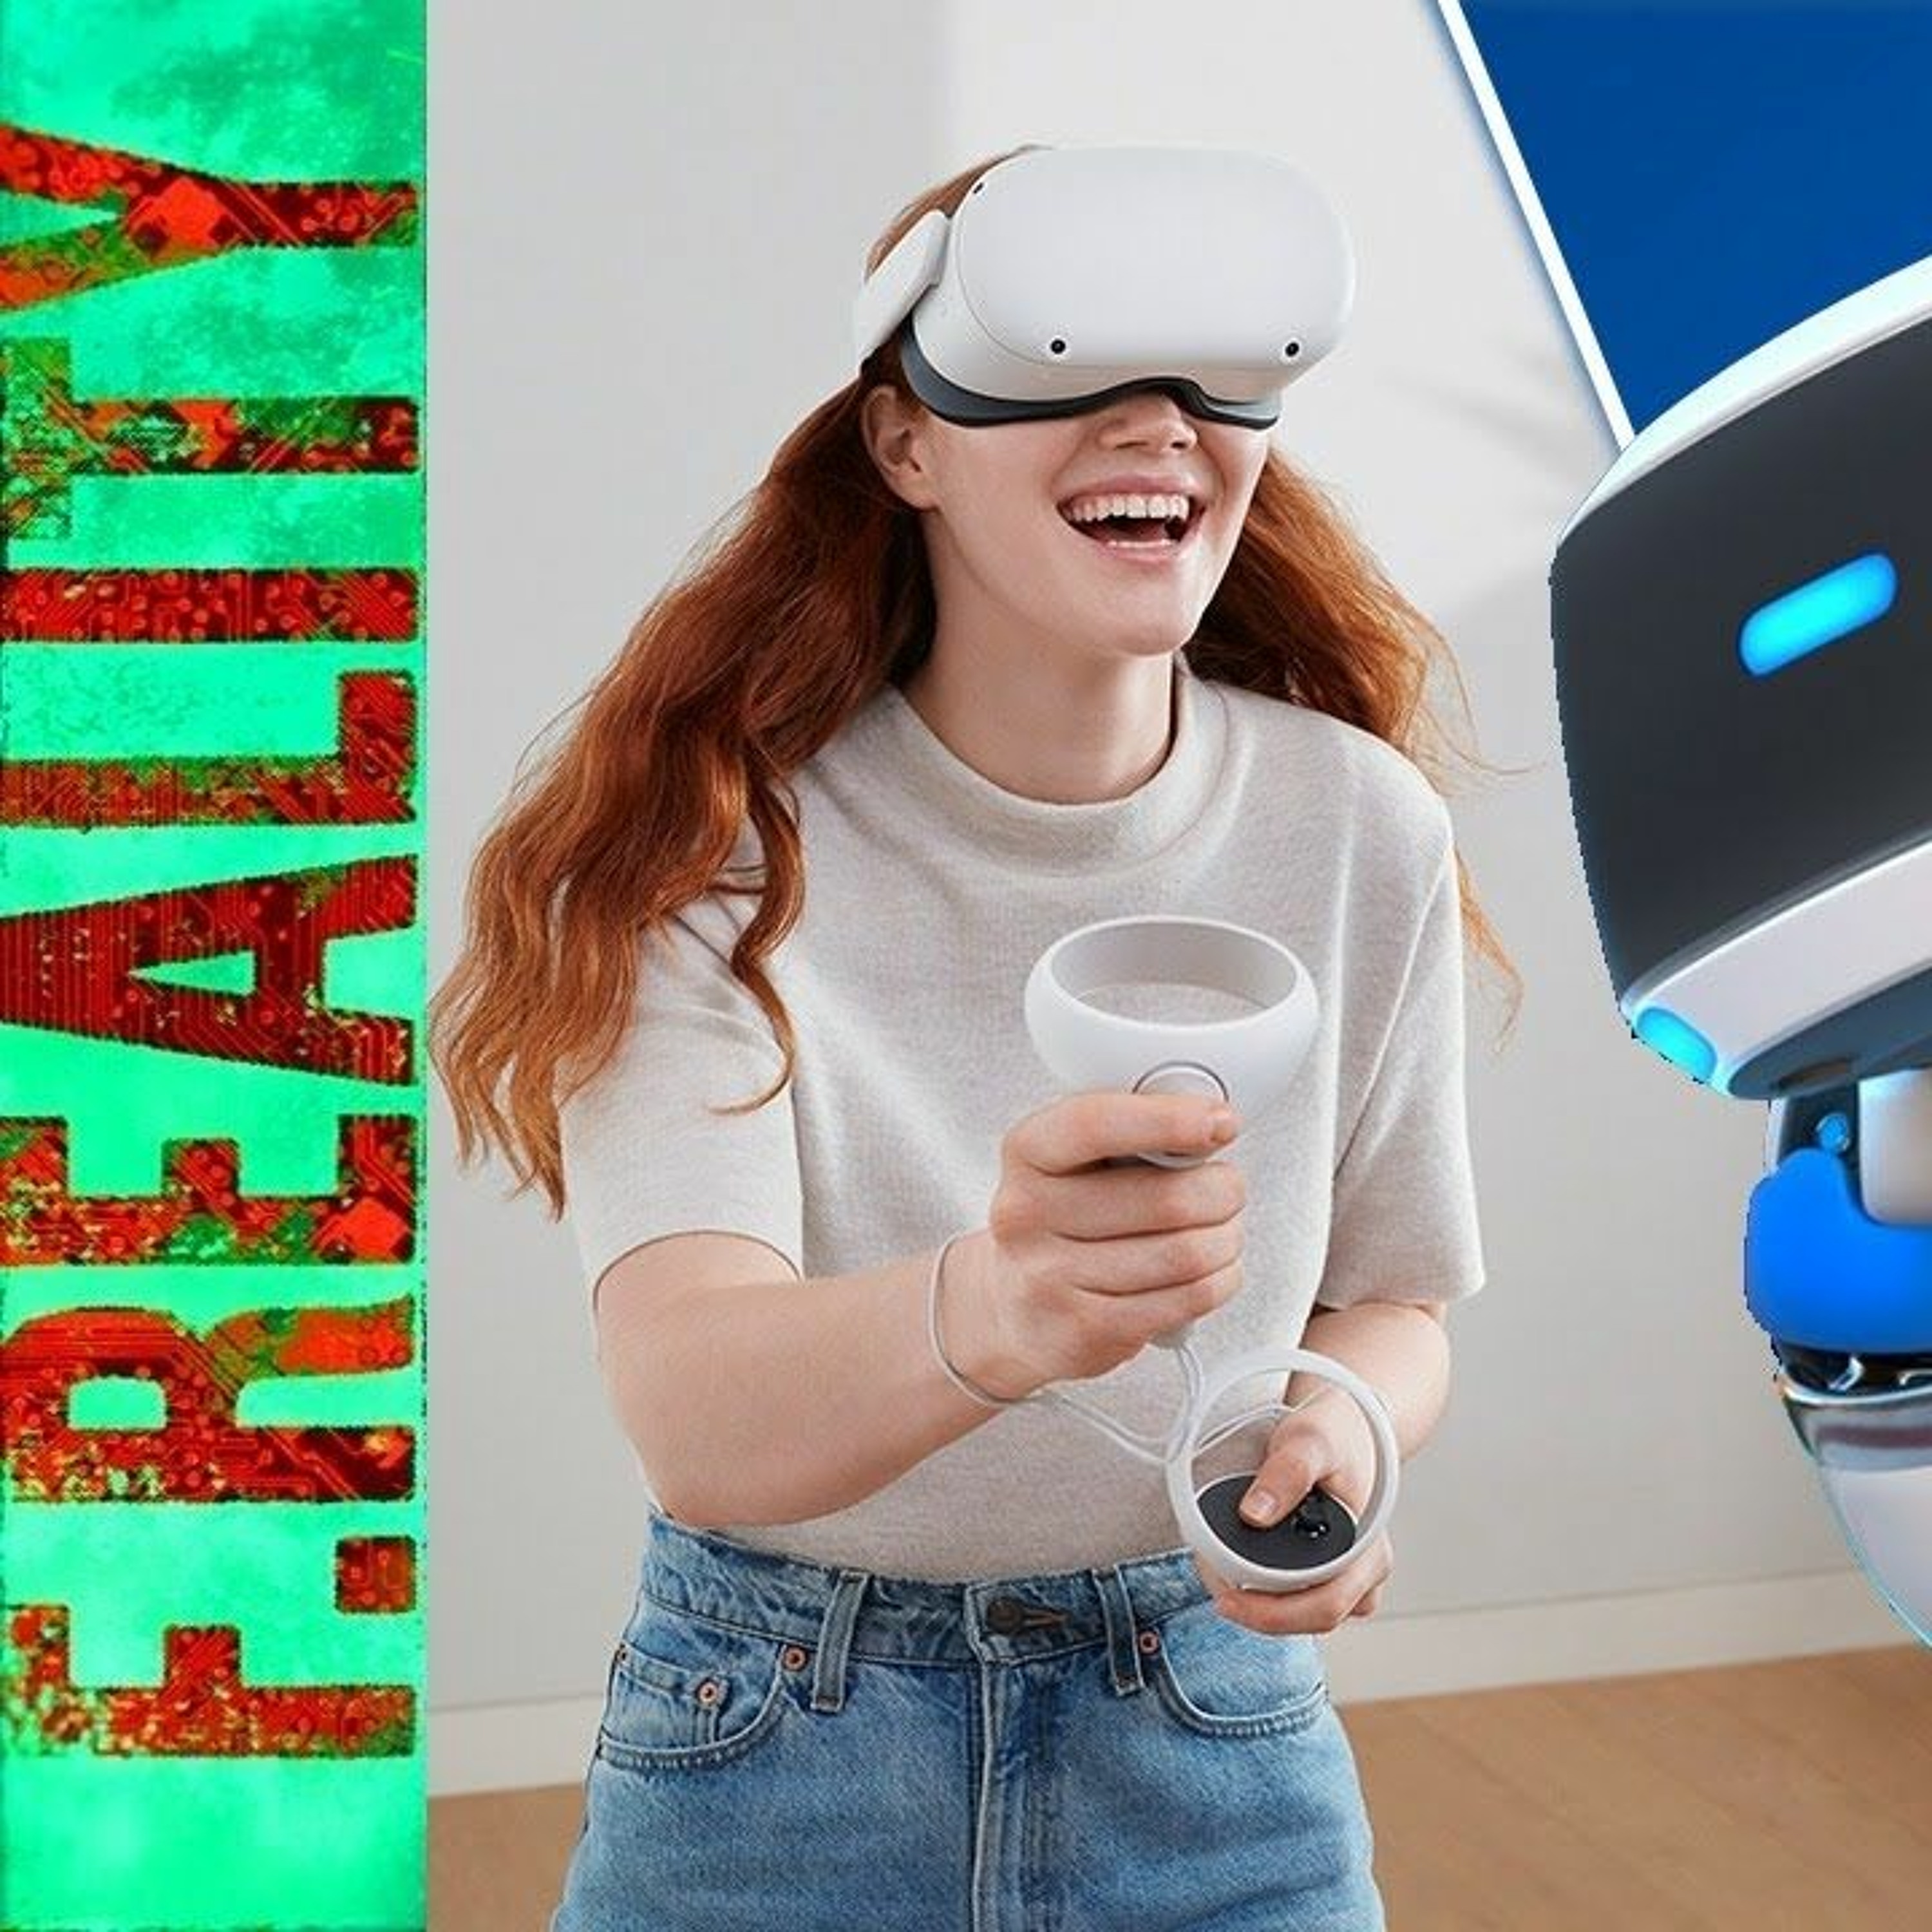 Ep.158 - Oculus Quest 2 Accessories, Playstation 5 Consoles and Assassin's Creed